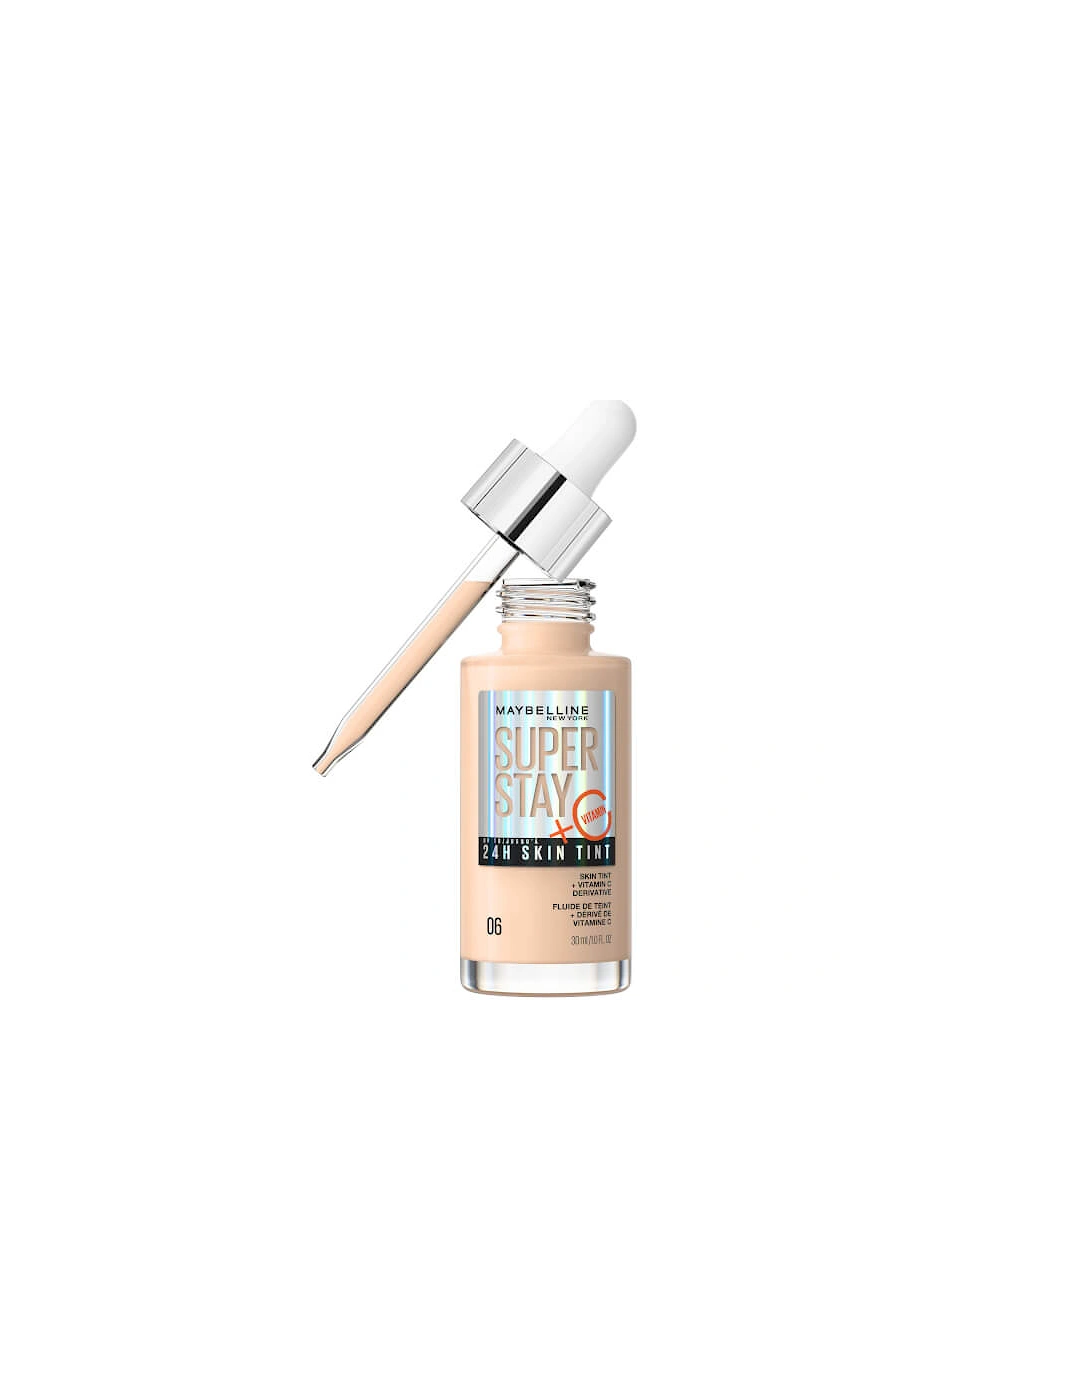 Super Stay up to 24H Skin Tint Foundation + Vitamin C - Shade 06, 2 of 1